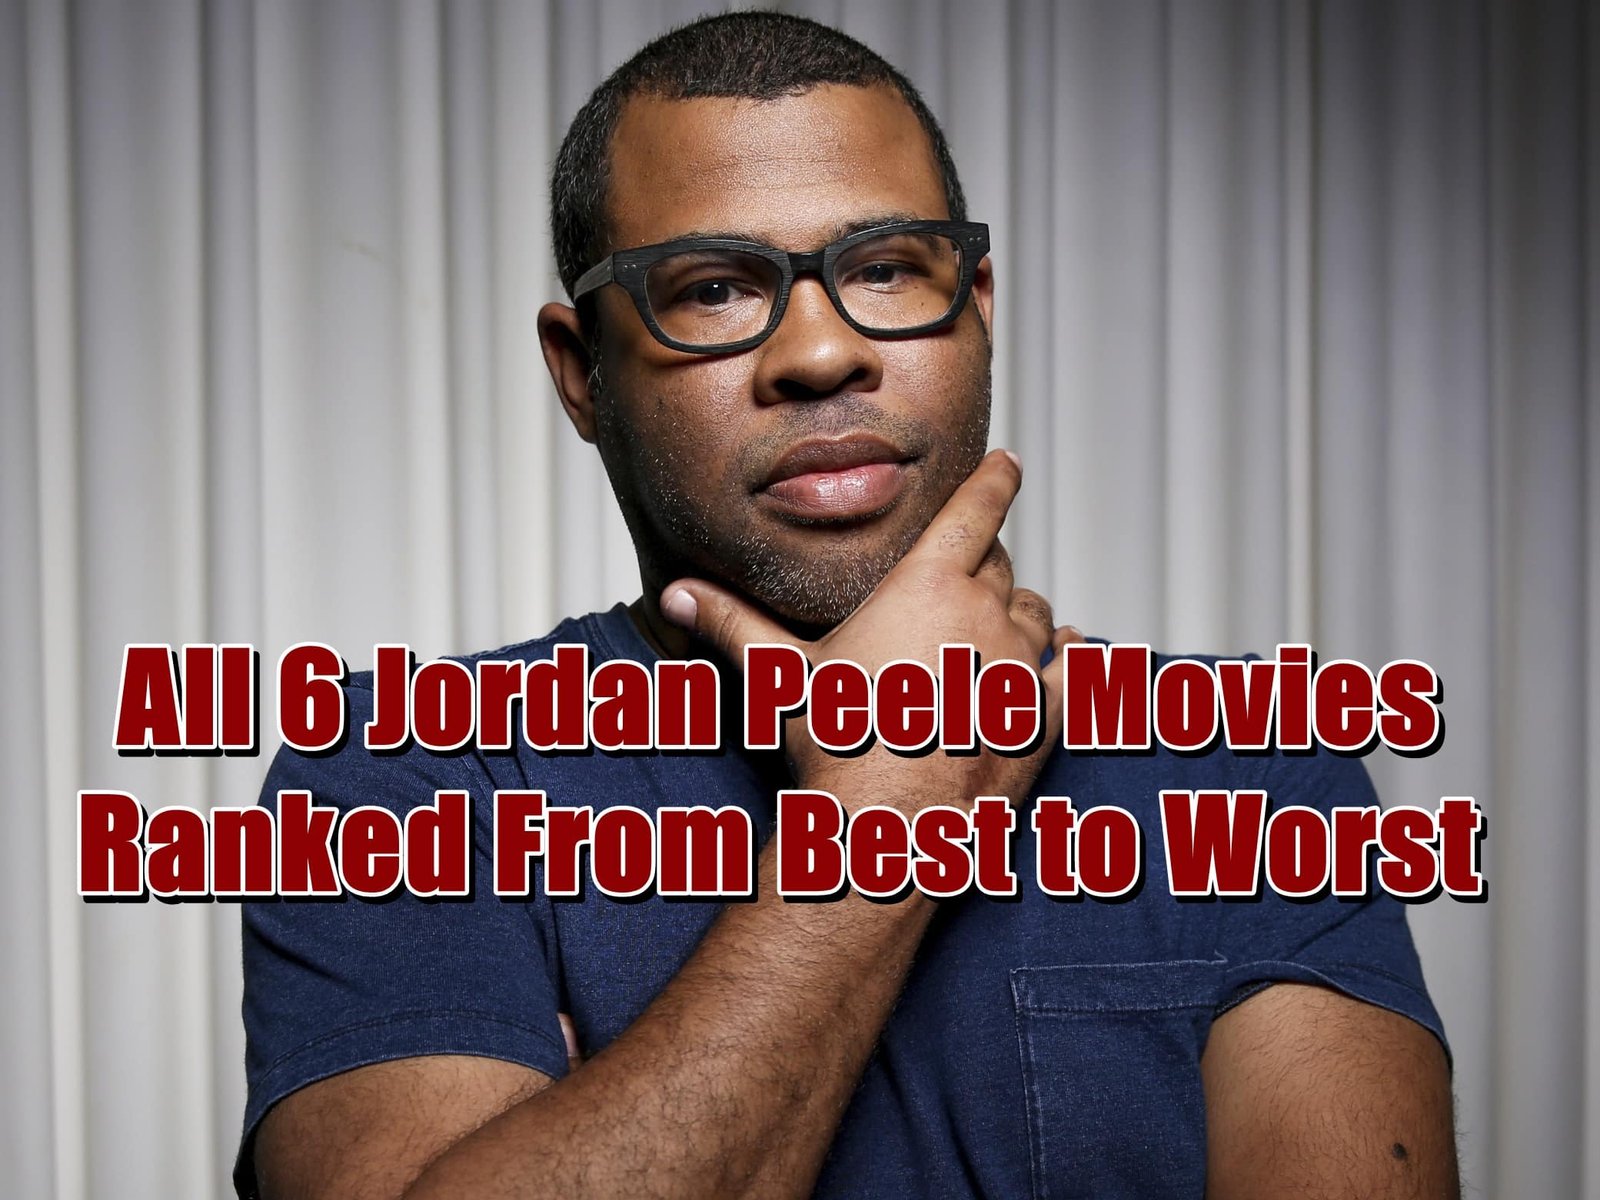 All 6 Jordan Peele Movies Ranked From Best to Worst